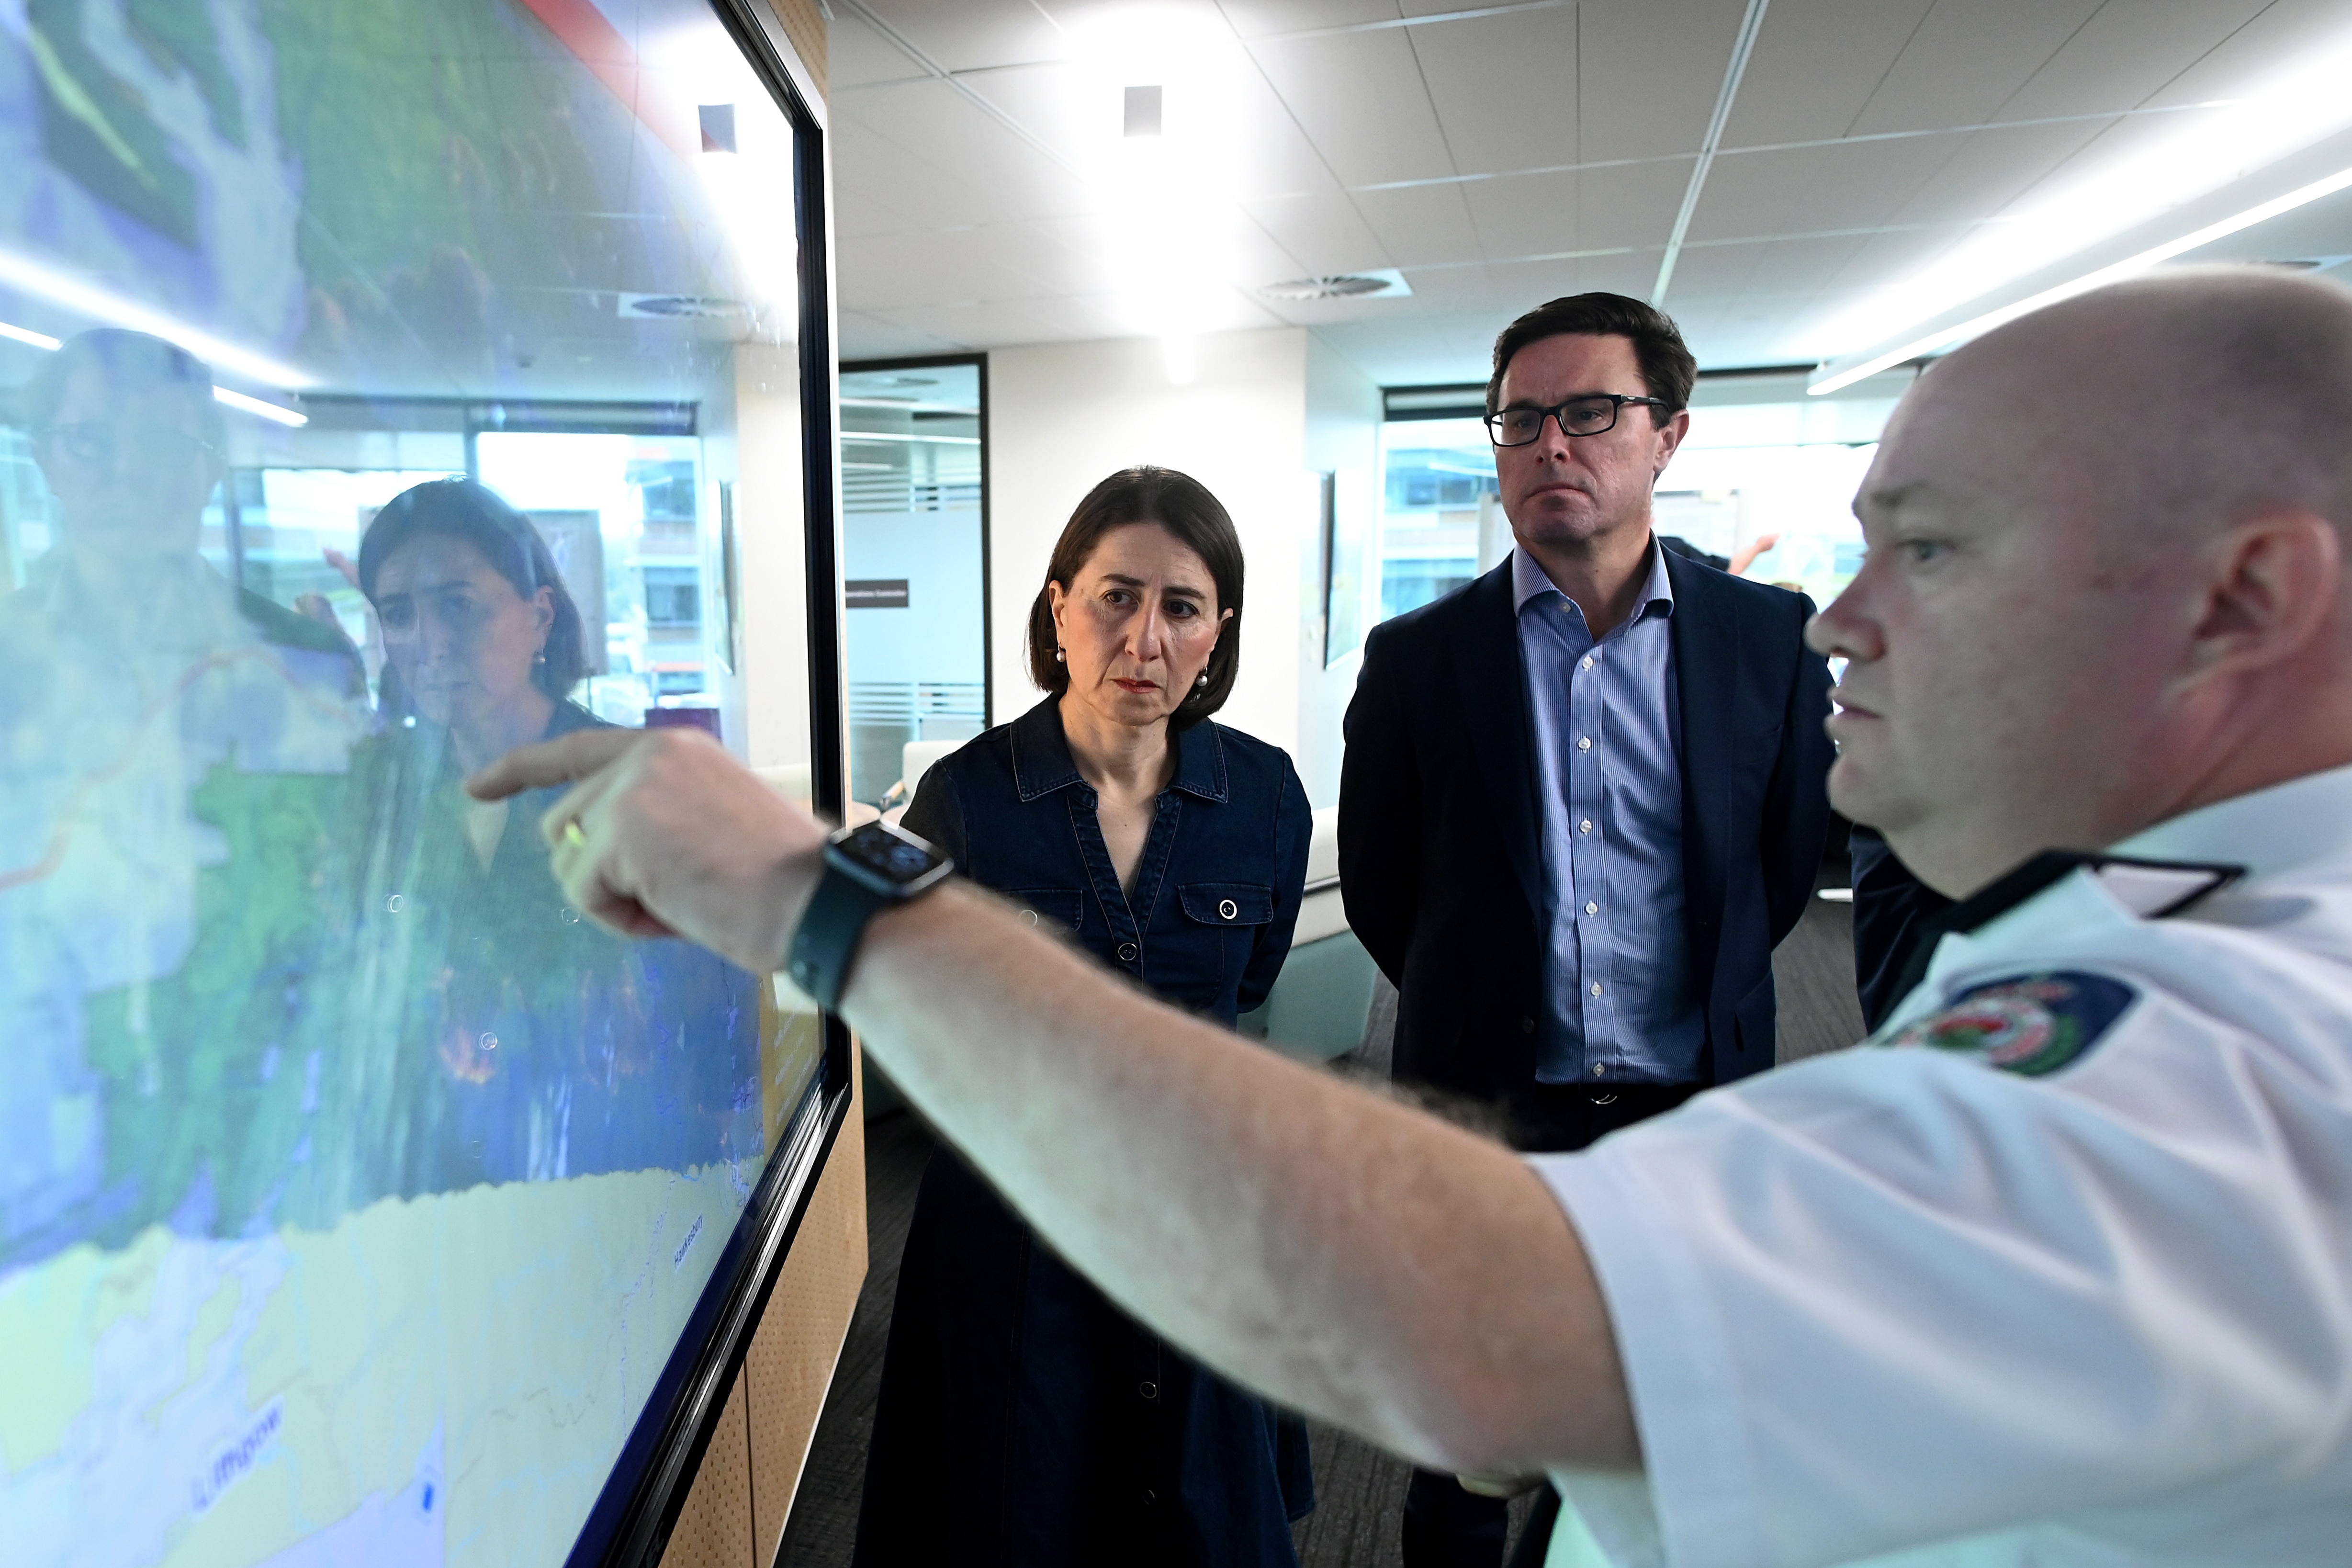 NSW Premier Gladys Berejiklian (left) and Federal Minister for Water Resources David Littleproud are briefed by Commissioner NSW RFS Shane Fitzsimmons.